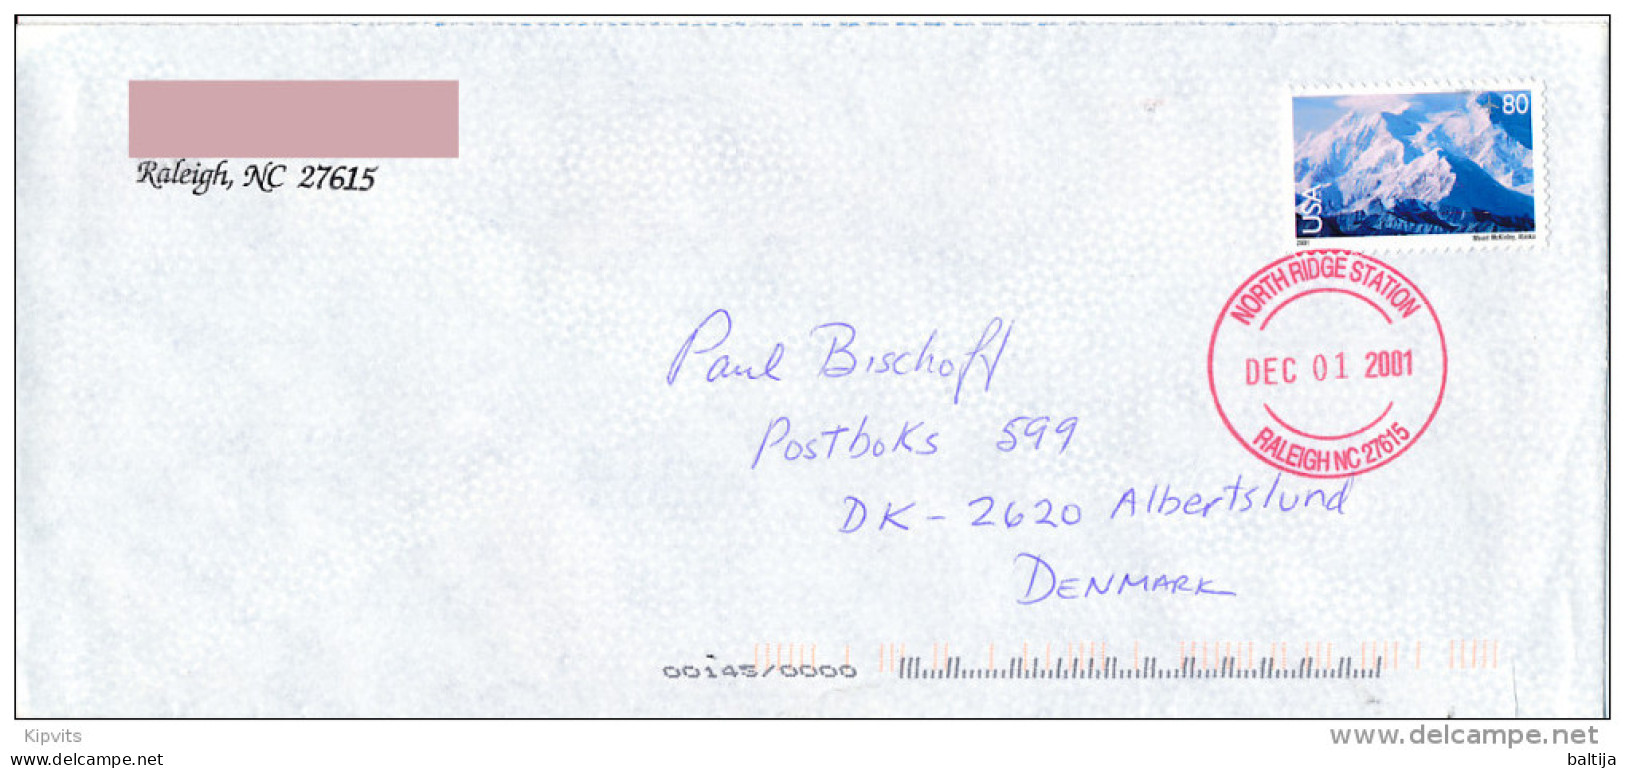 80c Mount McKinley Solo Cover Abroad - December 1, 2001 North Ridge Station Raleigh NC 27615 - Storia Postale